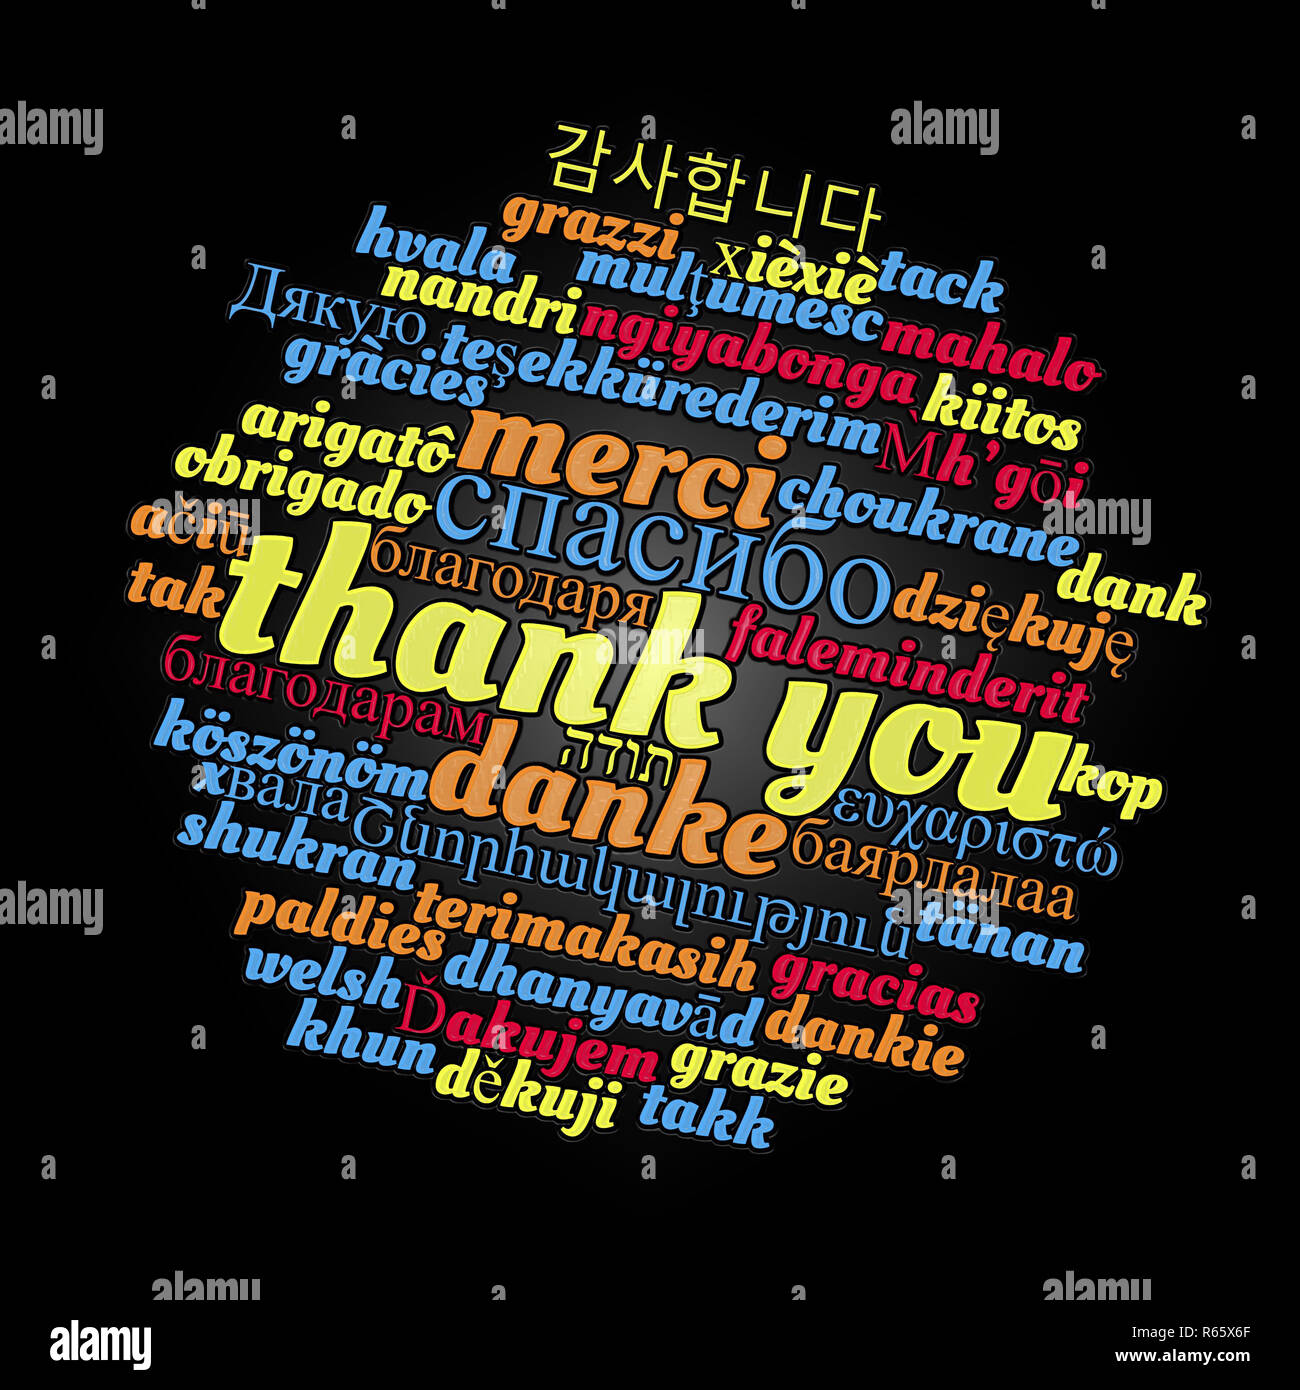 Thank you word cloud concept Stock Photo